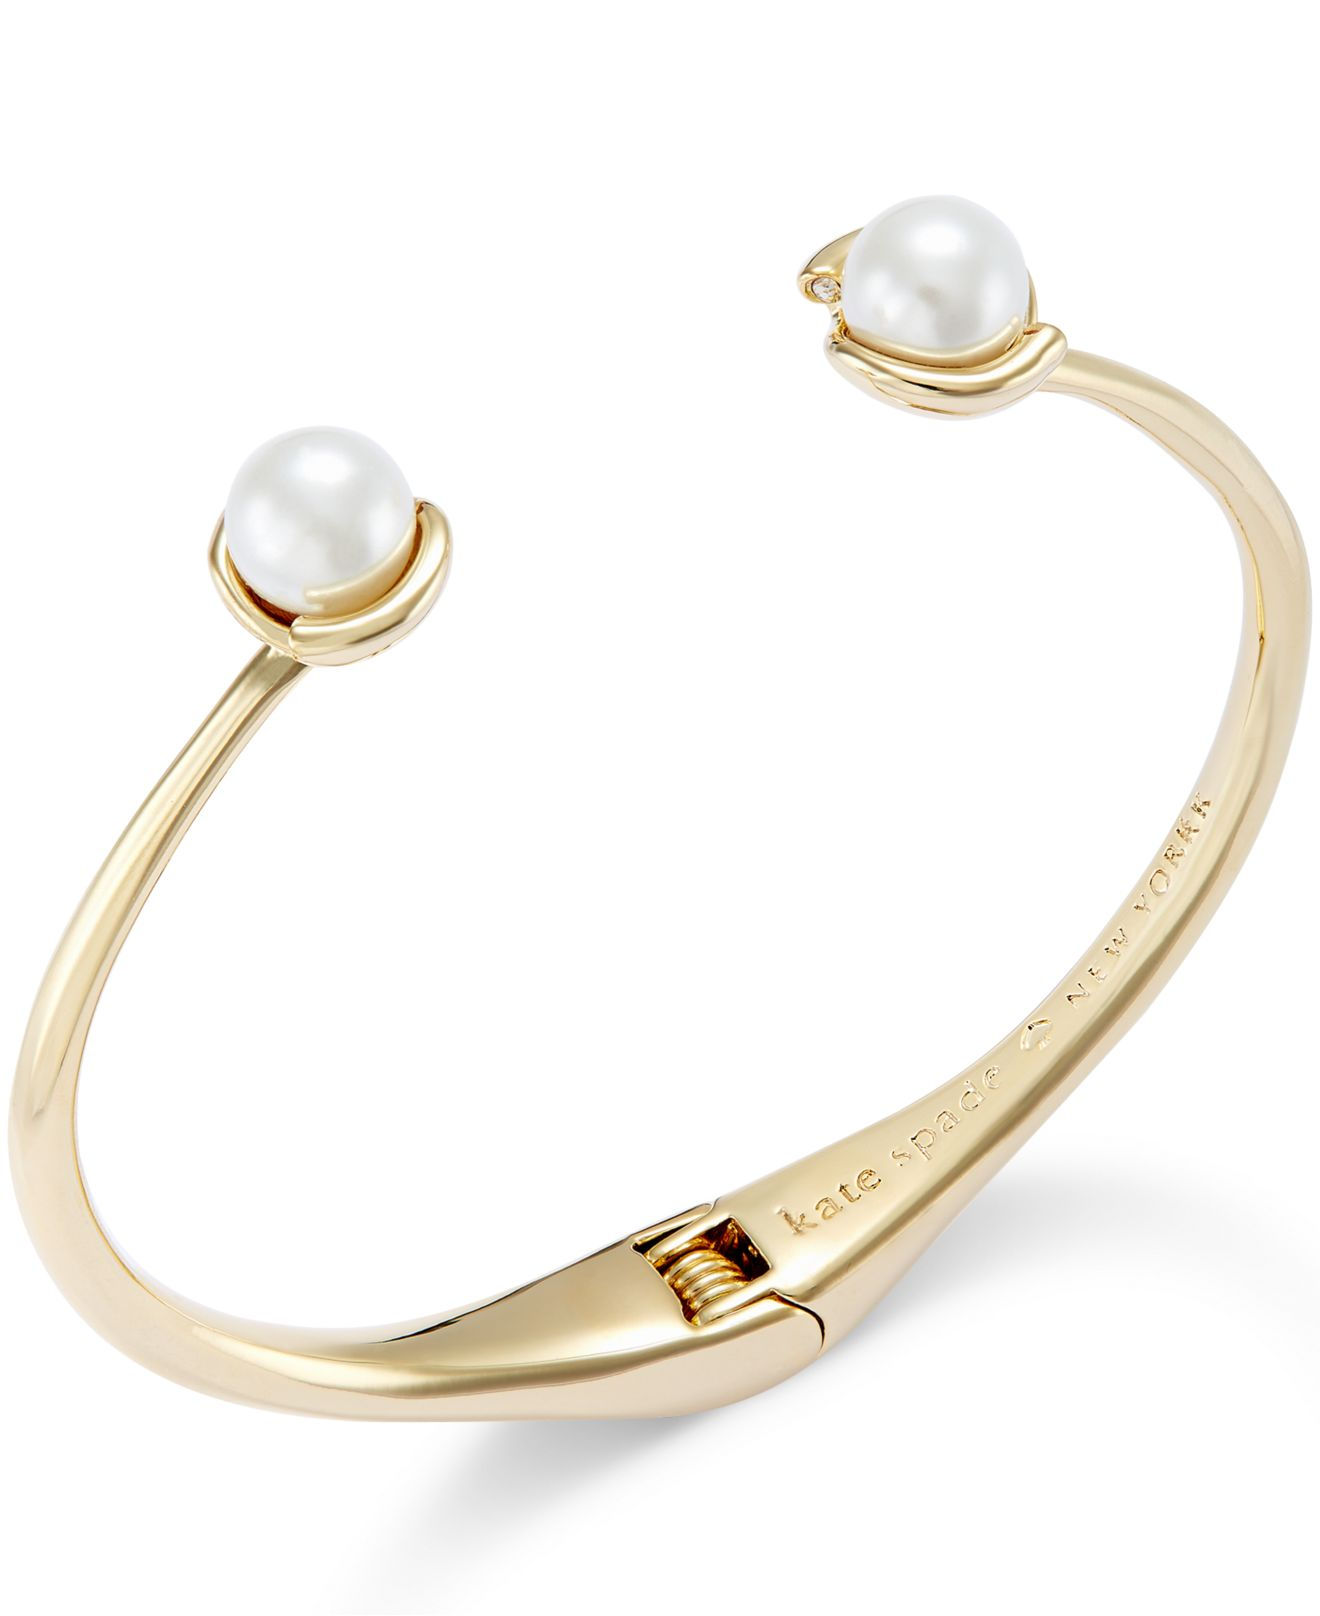 Lyst - Kate Spade New York 12k Gold-plated Imitation Pearl Cuff ...